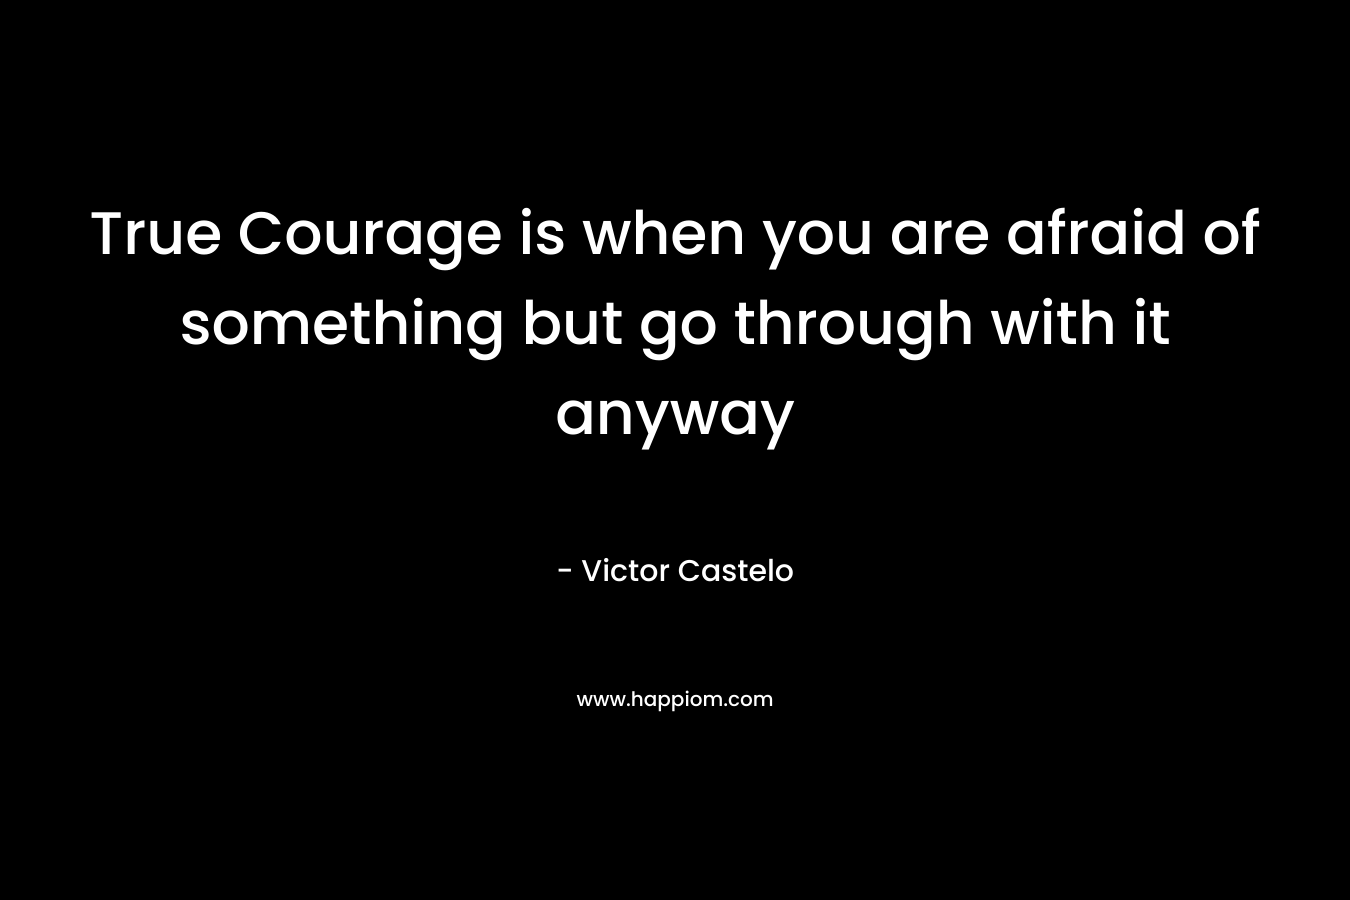 True Courage is when you are afraid of something but go through with it anyway – Victor Castelo